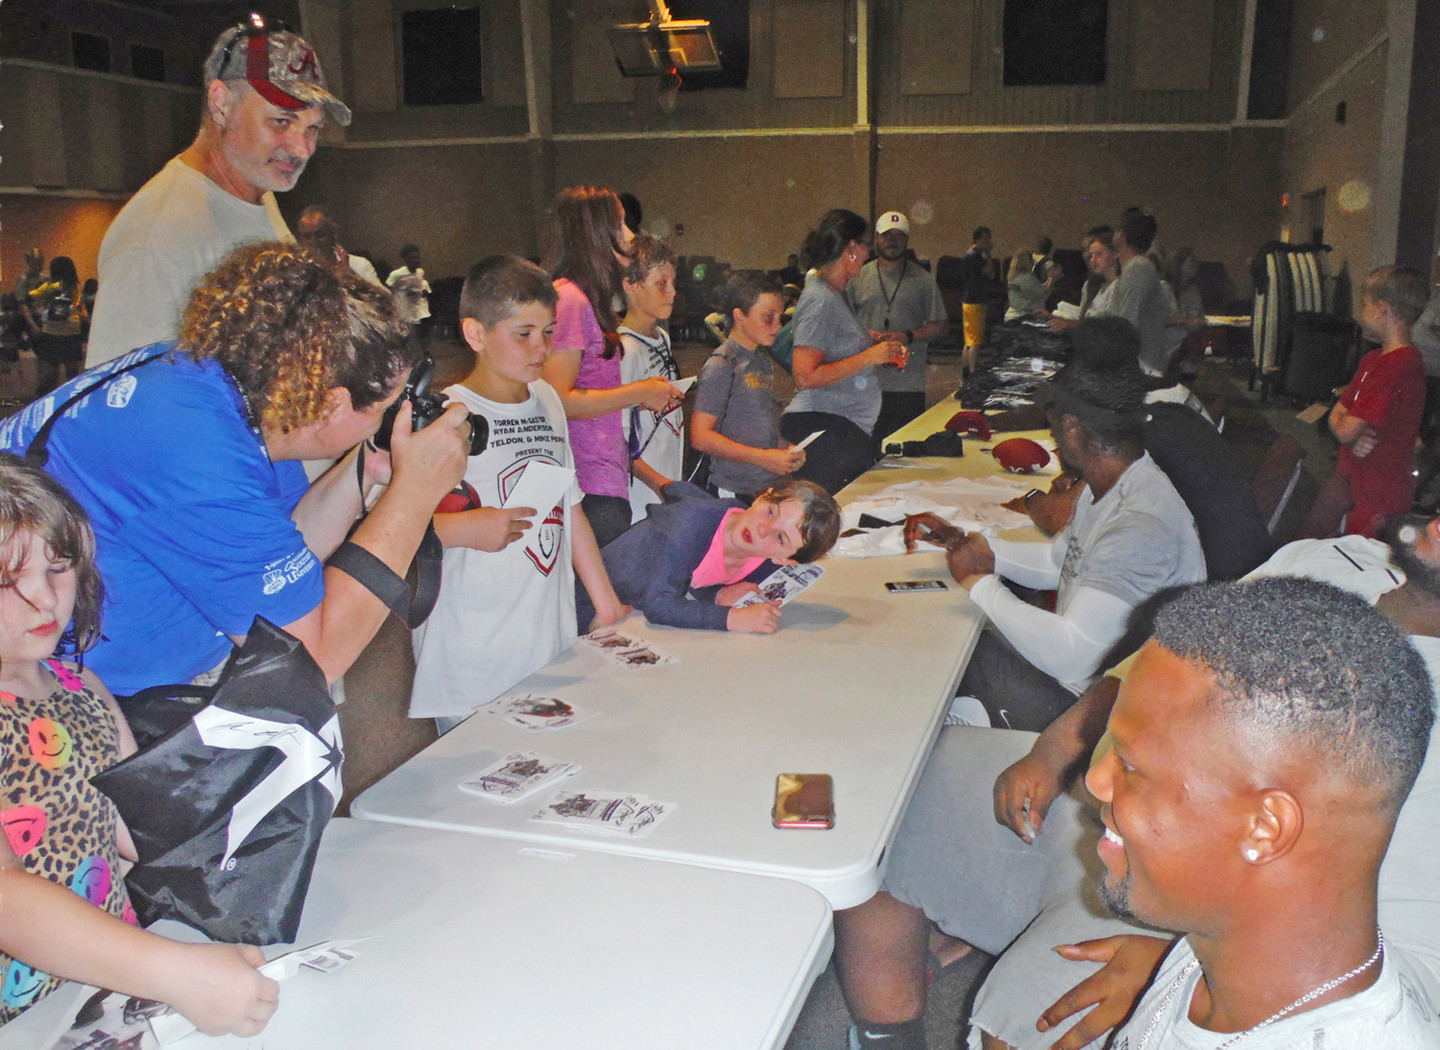 Meeting Cincinnati Bengals cornerback Torren McGaster and other players at Trojan Hall for autographs.